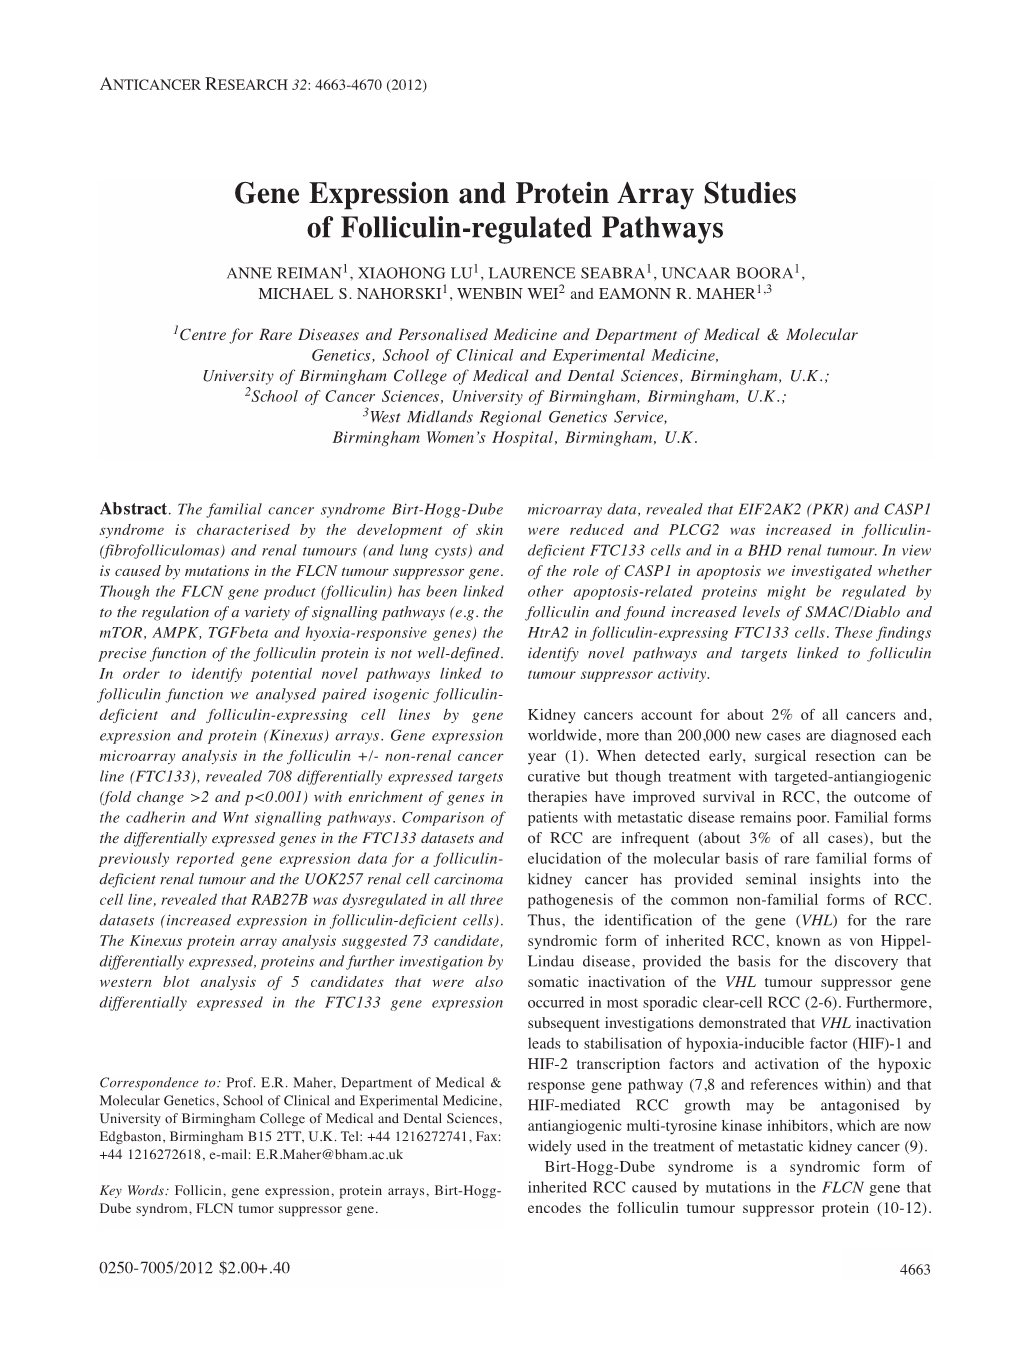 Gene Expression and Protein Array Studies of Folliculin-Regulated Pathways